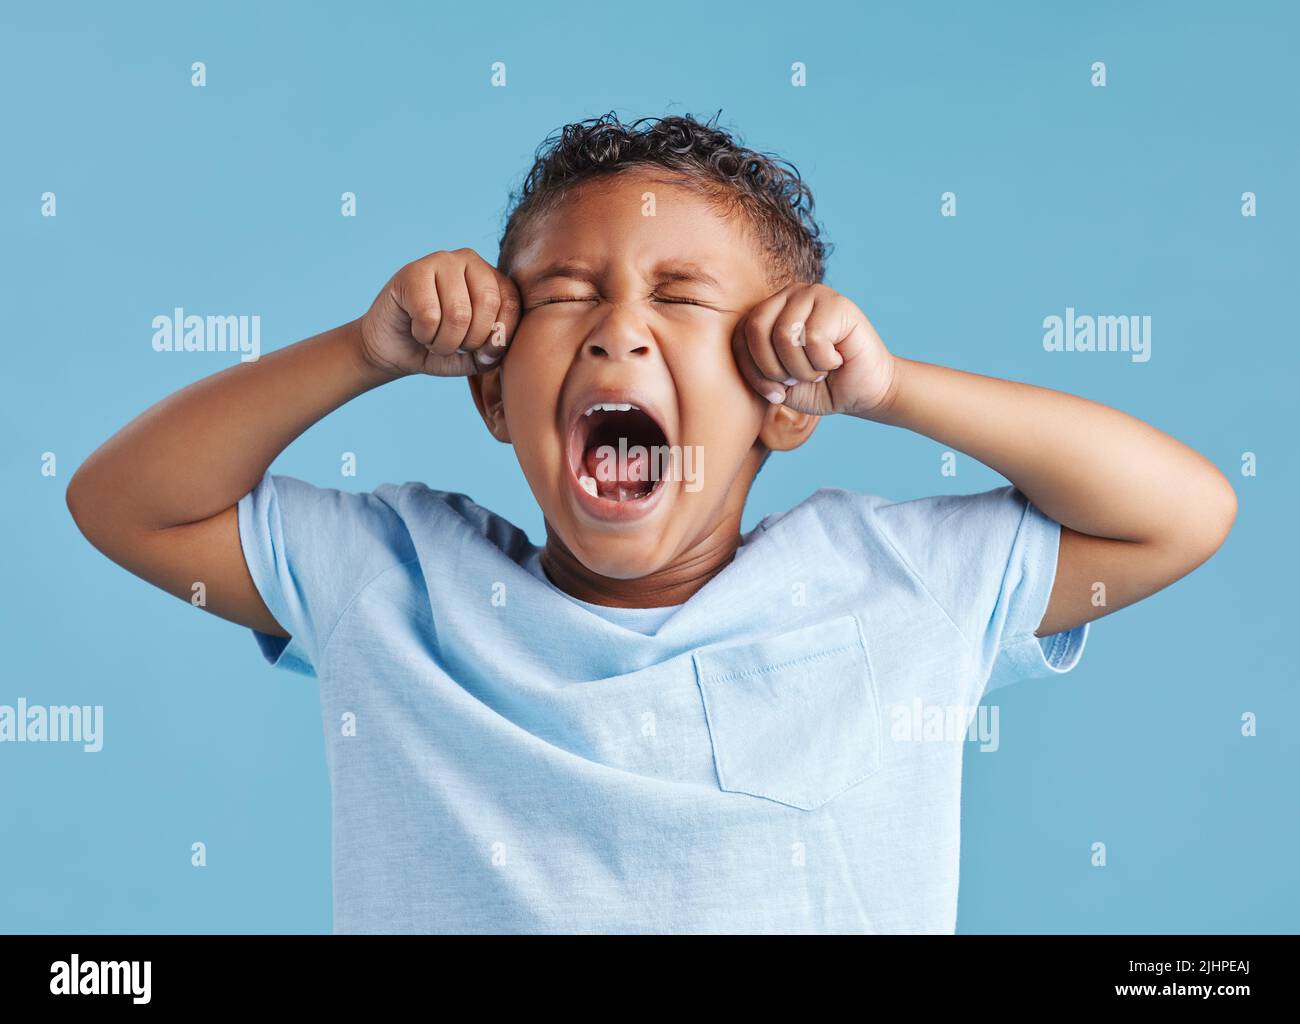 Unhappy little hispanic boy looking upset and crying while rubbing his eyes against a blue studio background. Unhappy preschooler kid bawling his eyes Stock Photo